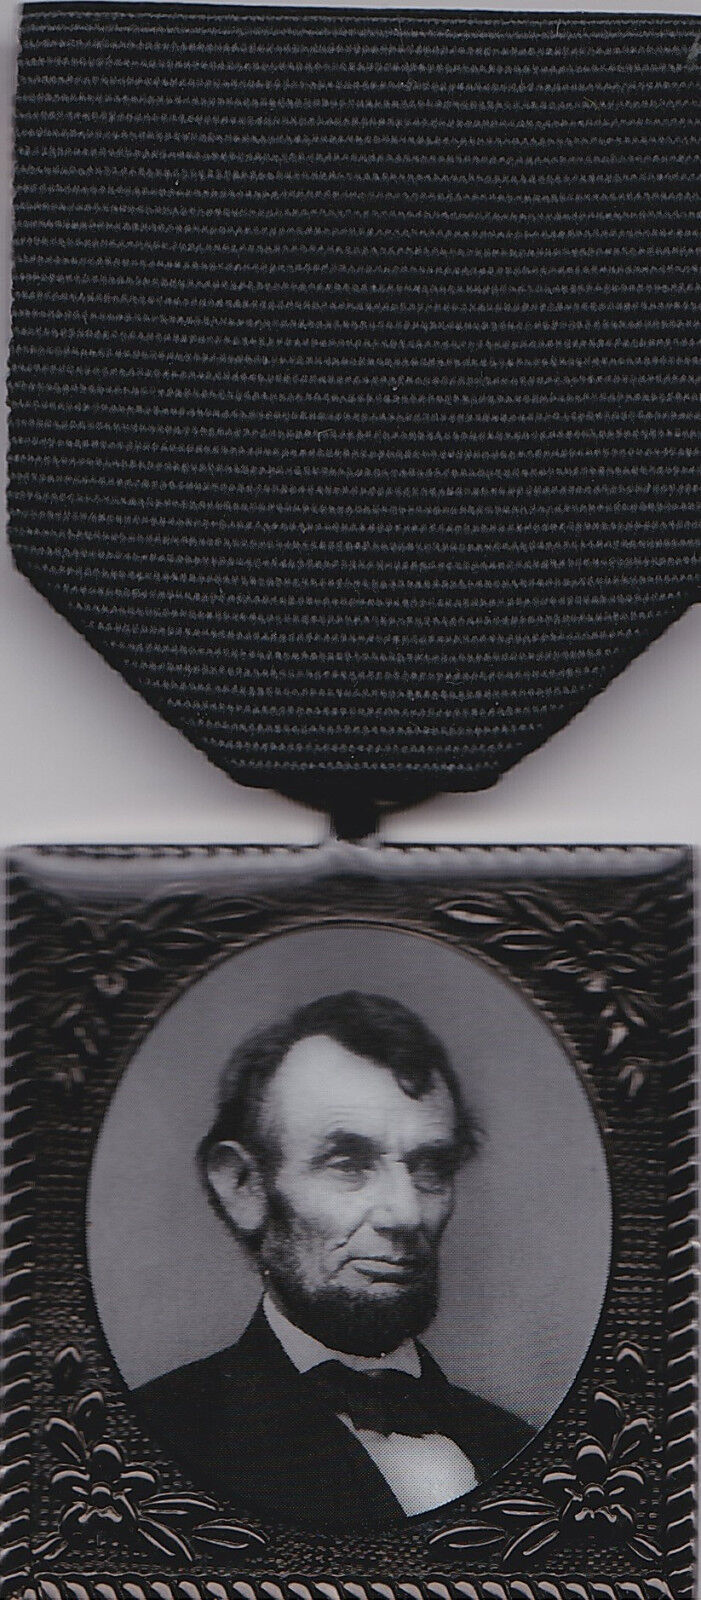 Abraham Lincoln Civil War 150th Anniversary Mourning Medal with 2 Medal Drapes 